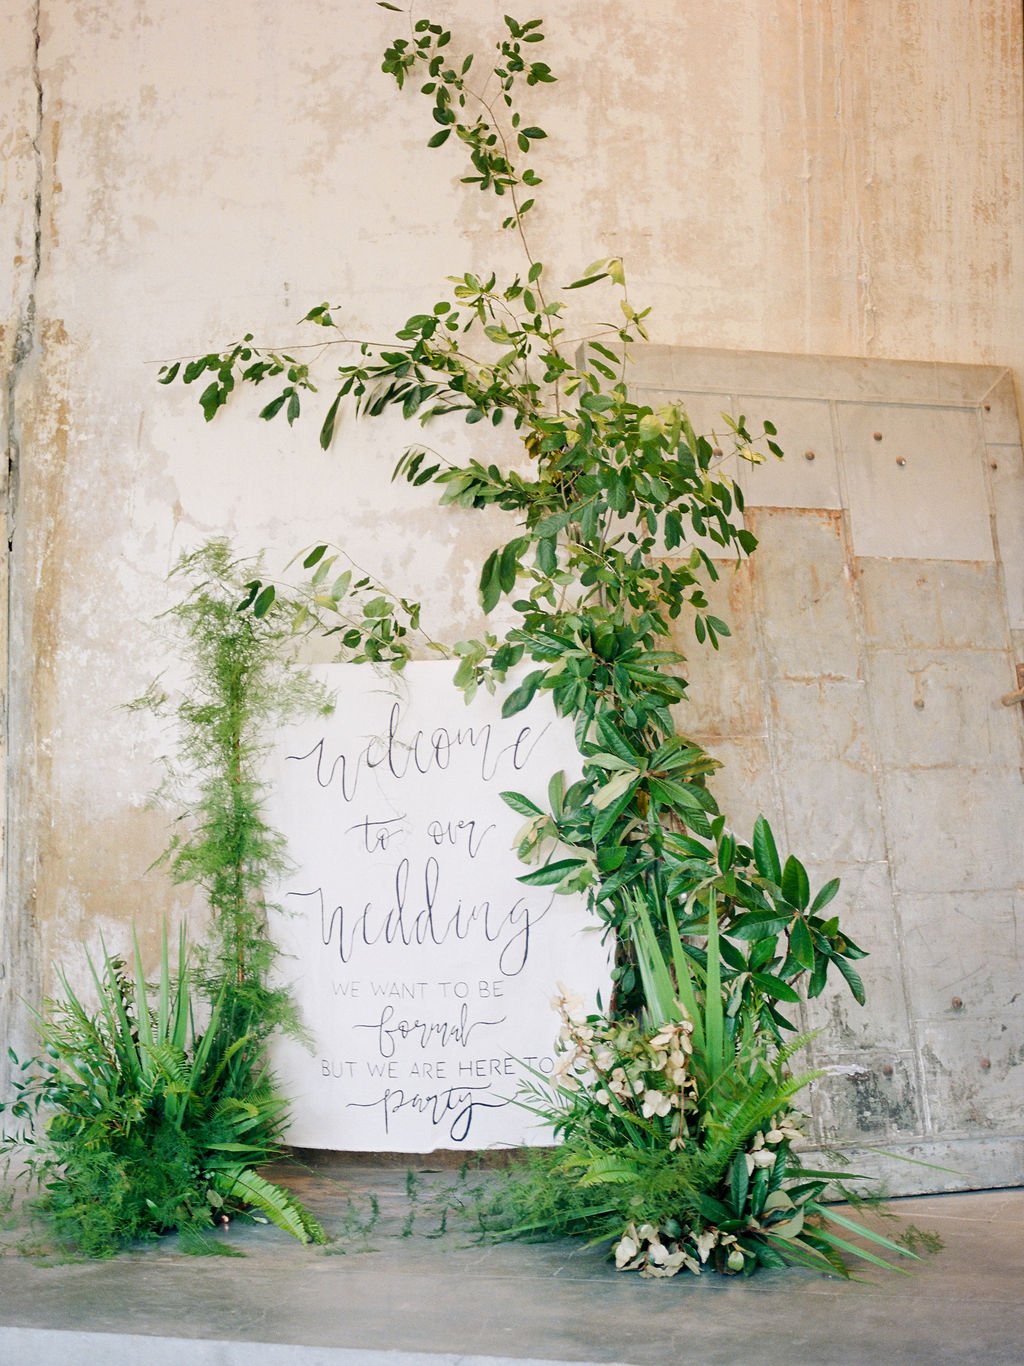 5-things-to-know-before-booking-your-wedding-florist-brought-to-you-by-savannah-wedding-planner-and-savannah-florist-ivory-and-beau-savannah-plant-riverside-district-savannah-wedding-savannah-bridal-shop-maggie-sottero-made-wiith-love-bridal-1.jpg